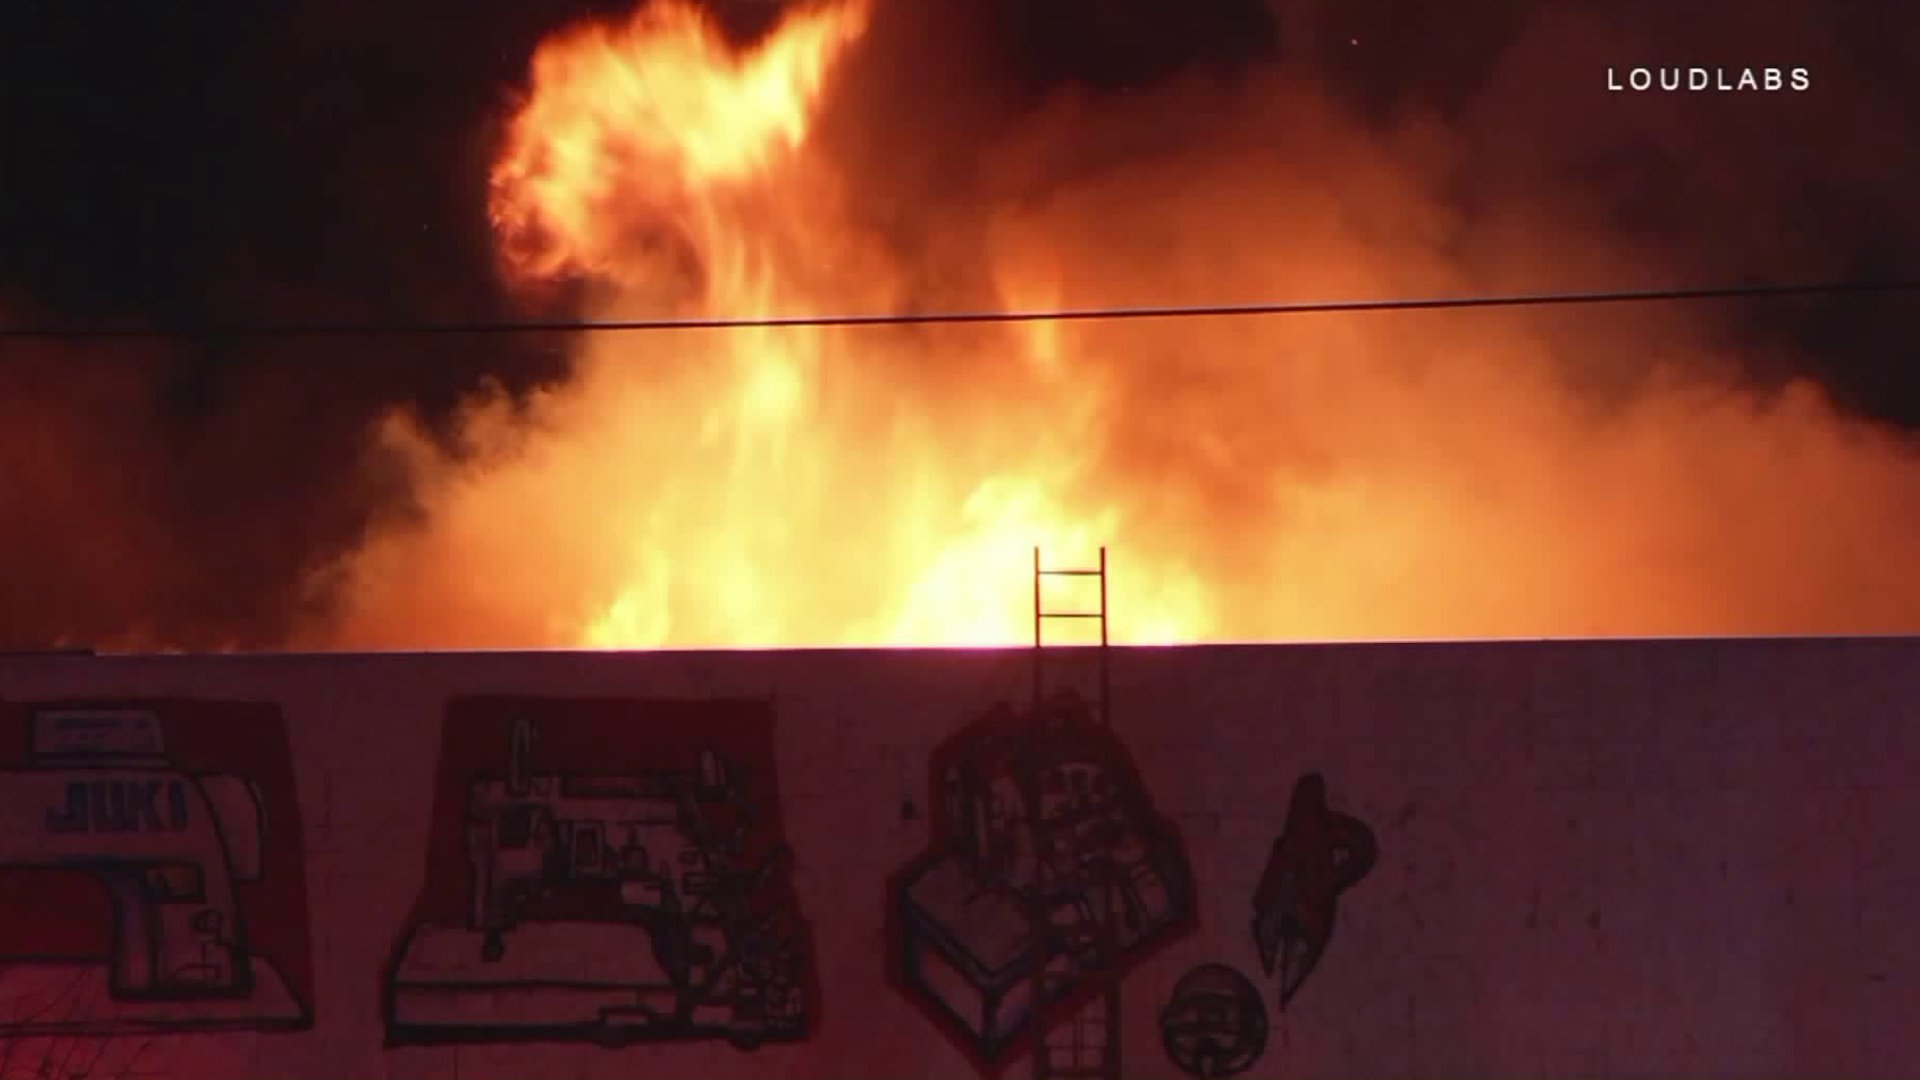 Crews Make Aggressive Efforts to Battle Fire at South L.A. Fabric ...